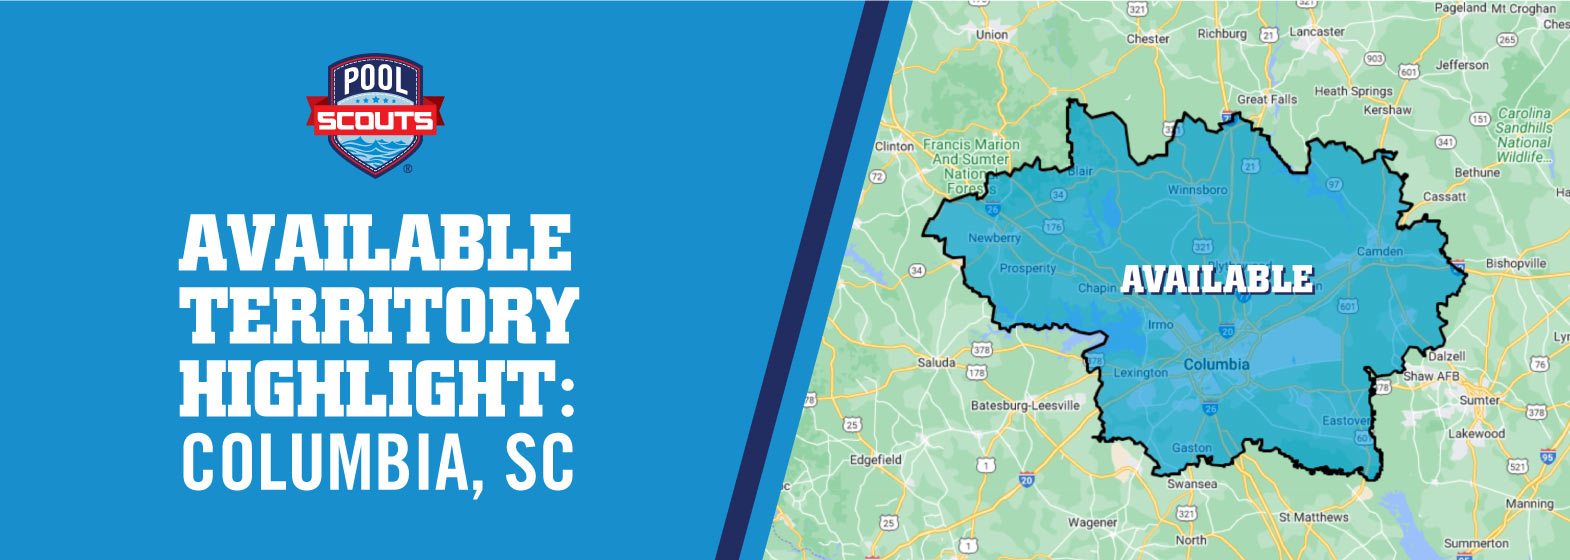 Image of Available Territory Highlight: Columbia SC